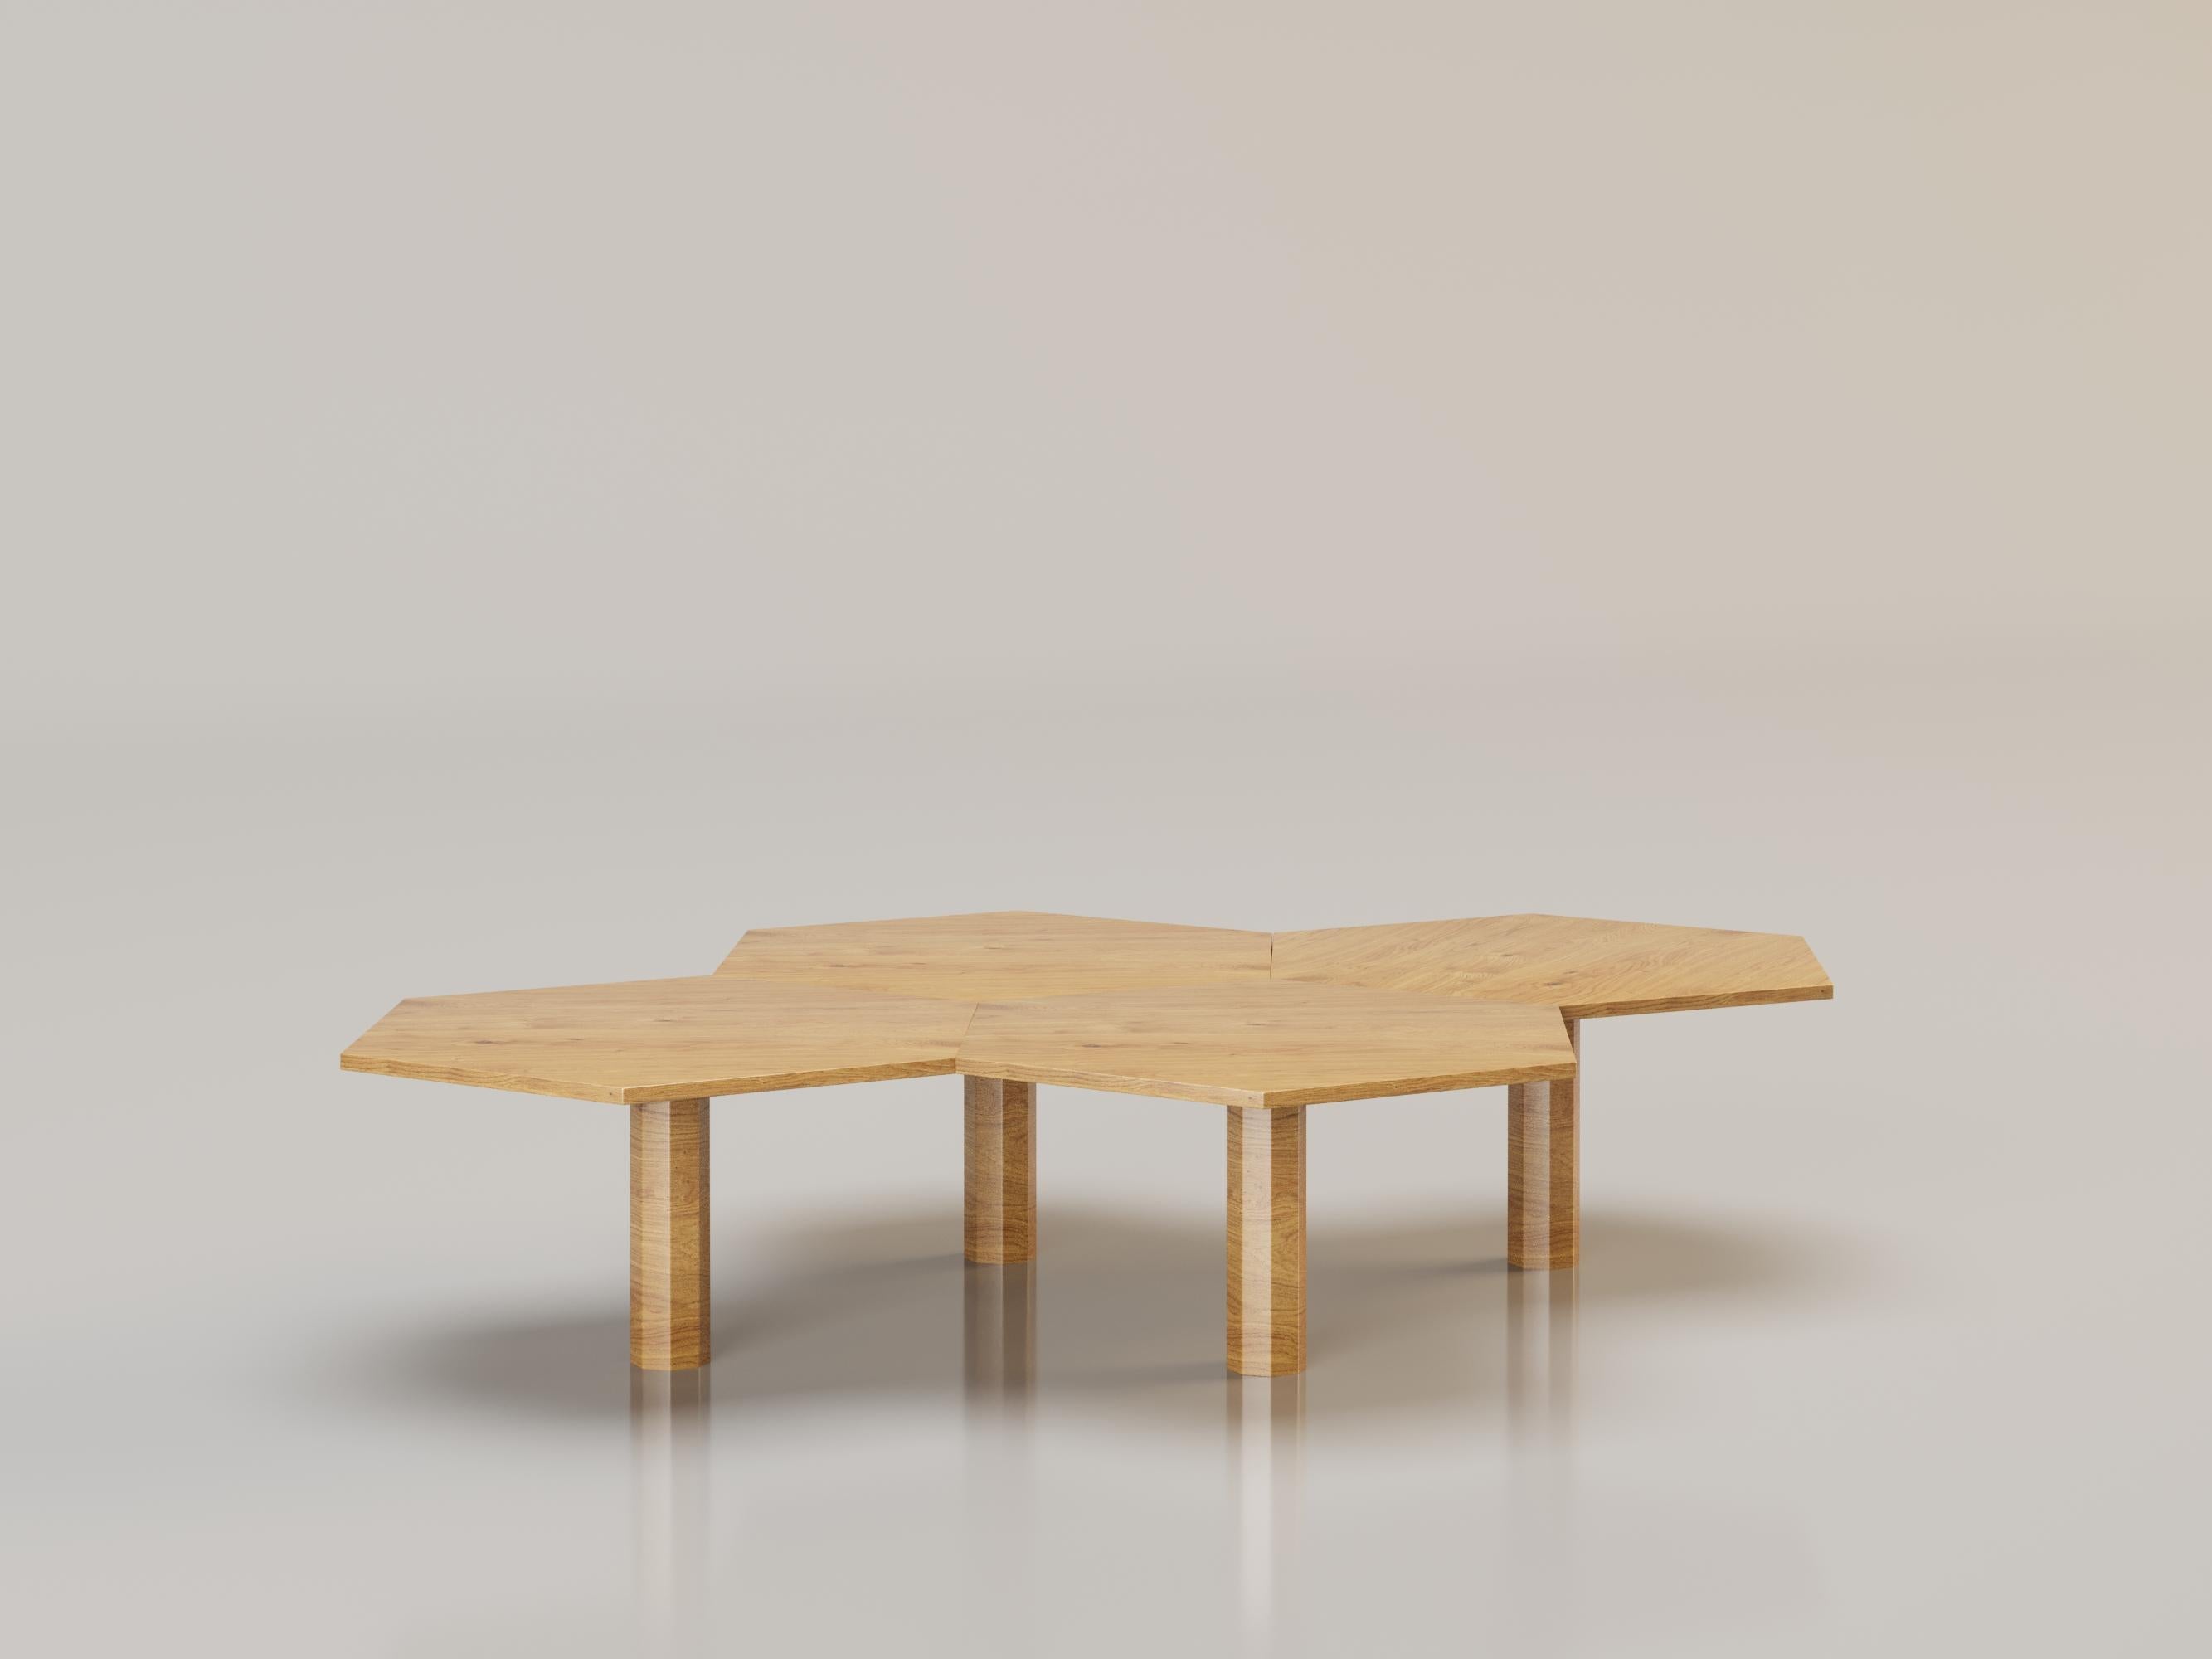 L'ÉLÉGANTE Coffee Table by Alexandre Ligios

Oak Wood

L 59 x H 35 x D 18

The oak coffee table embodies timeless elegance and the natural robustness of wood. Its slender cylindrical legs add a touch of finesse and modernity, creating a perfect